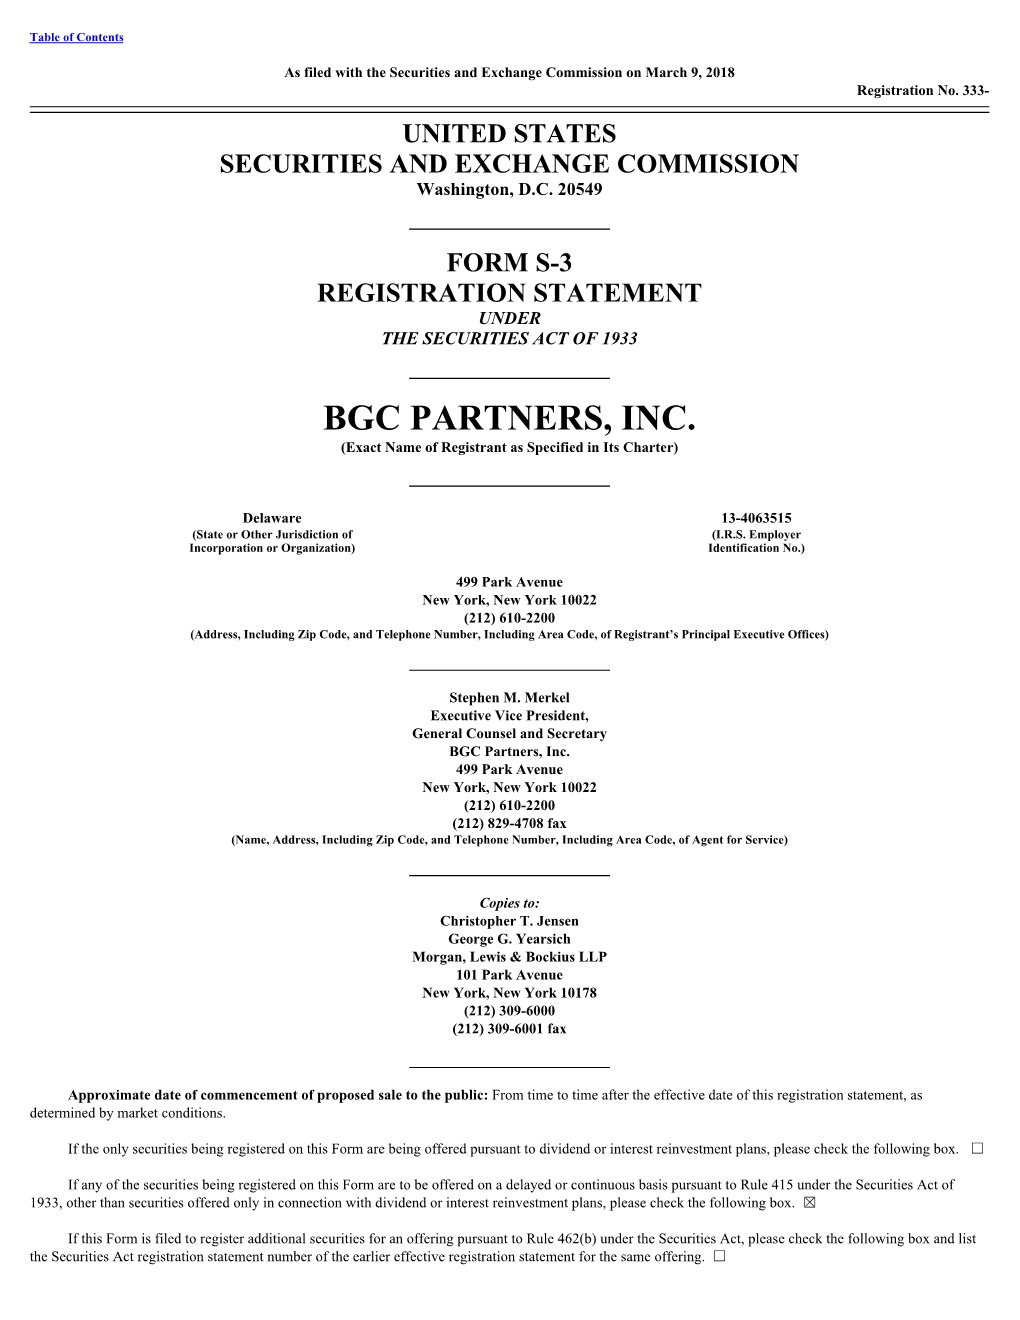 BGC PARTNERS, INC. (Exact Name of Registrant As Specified in Its Charter)